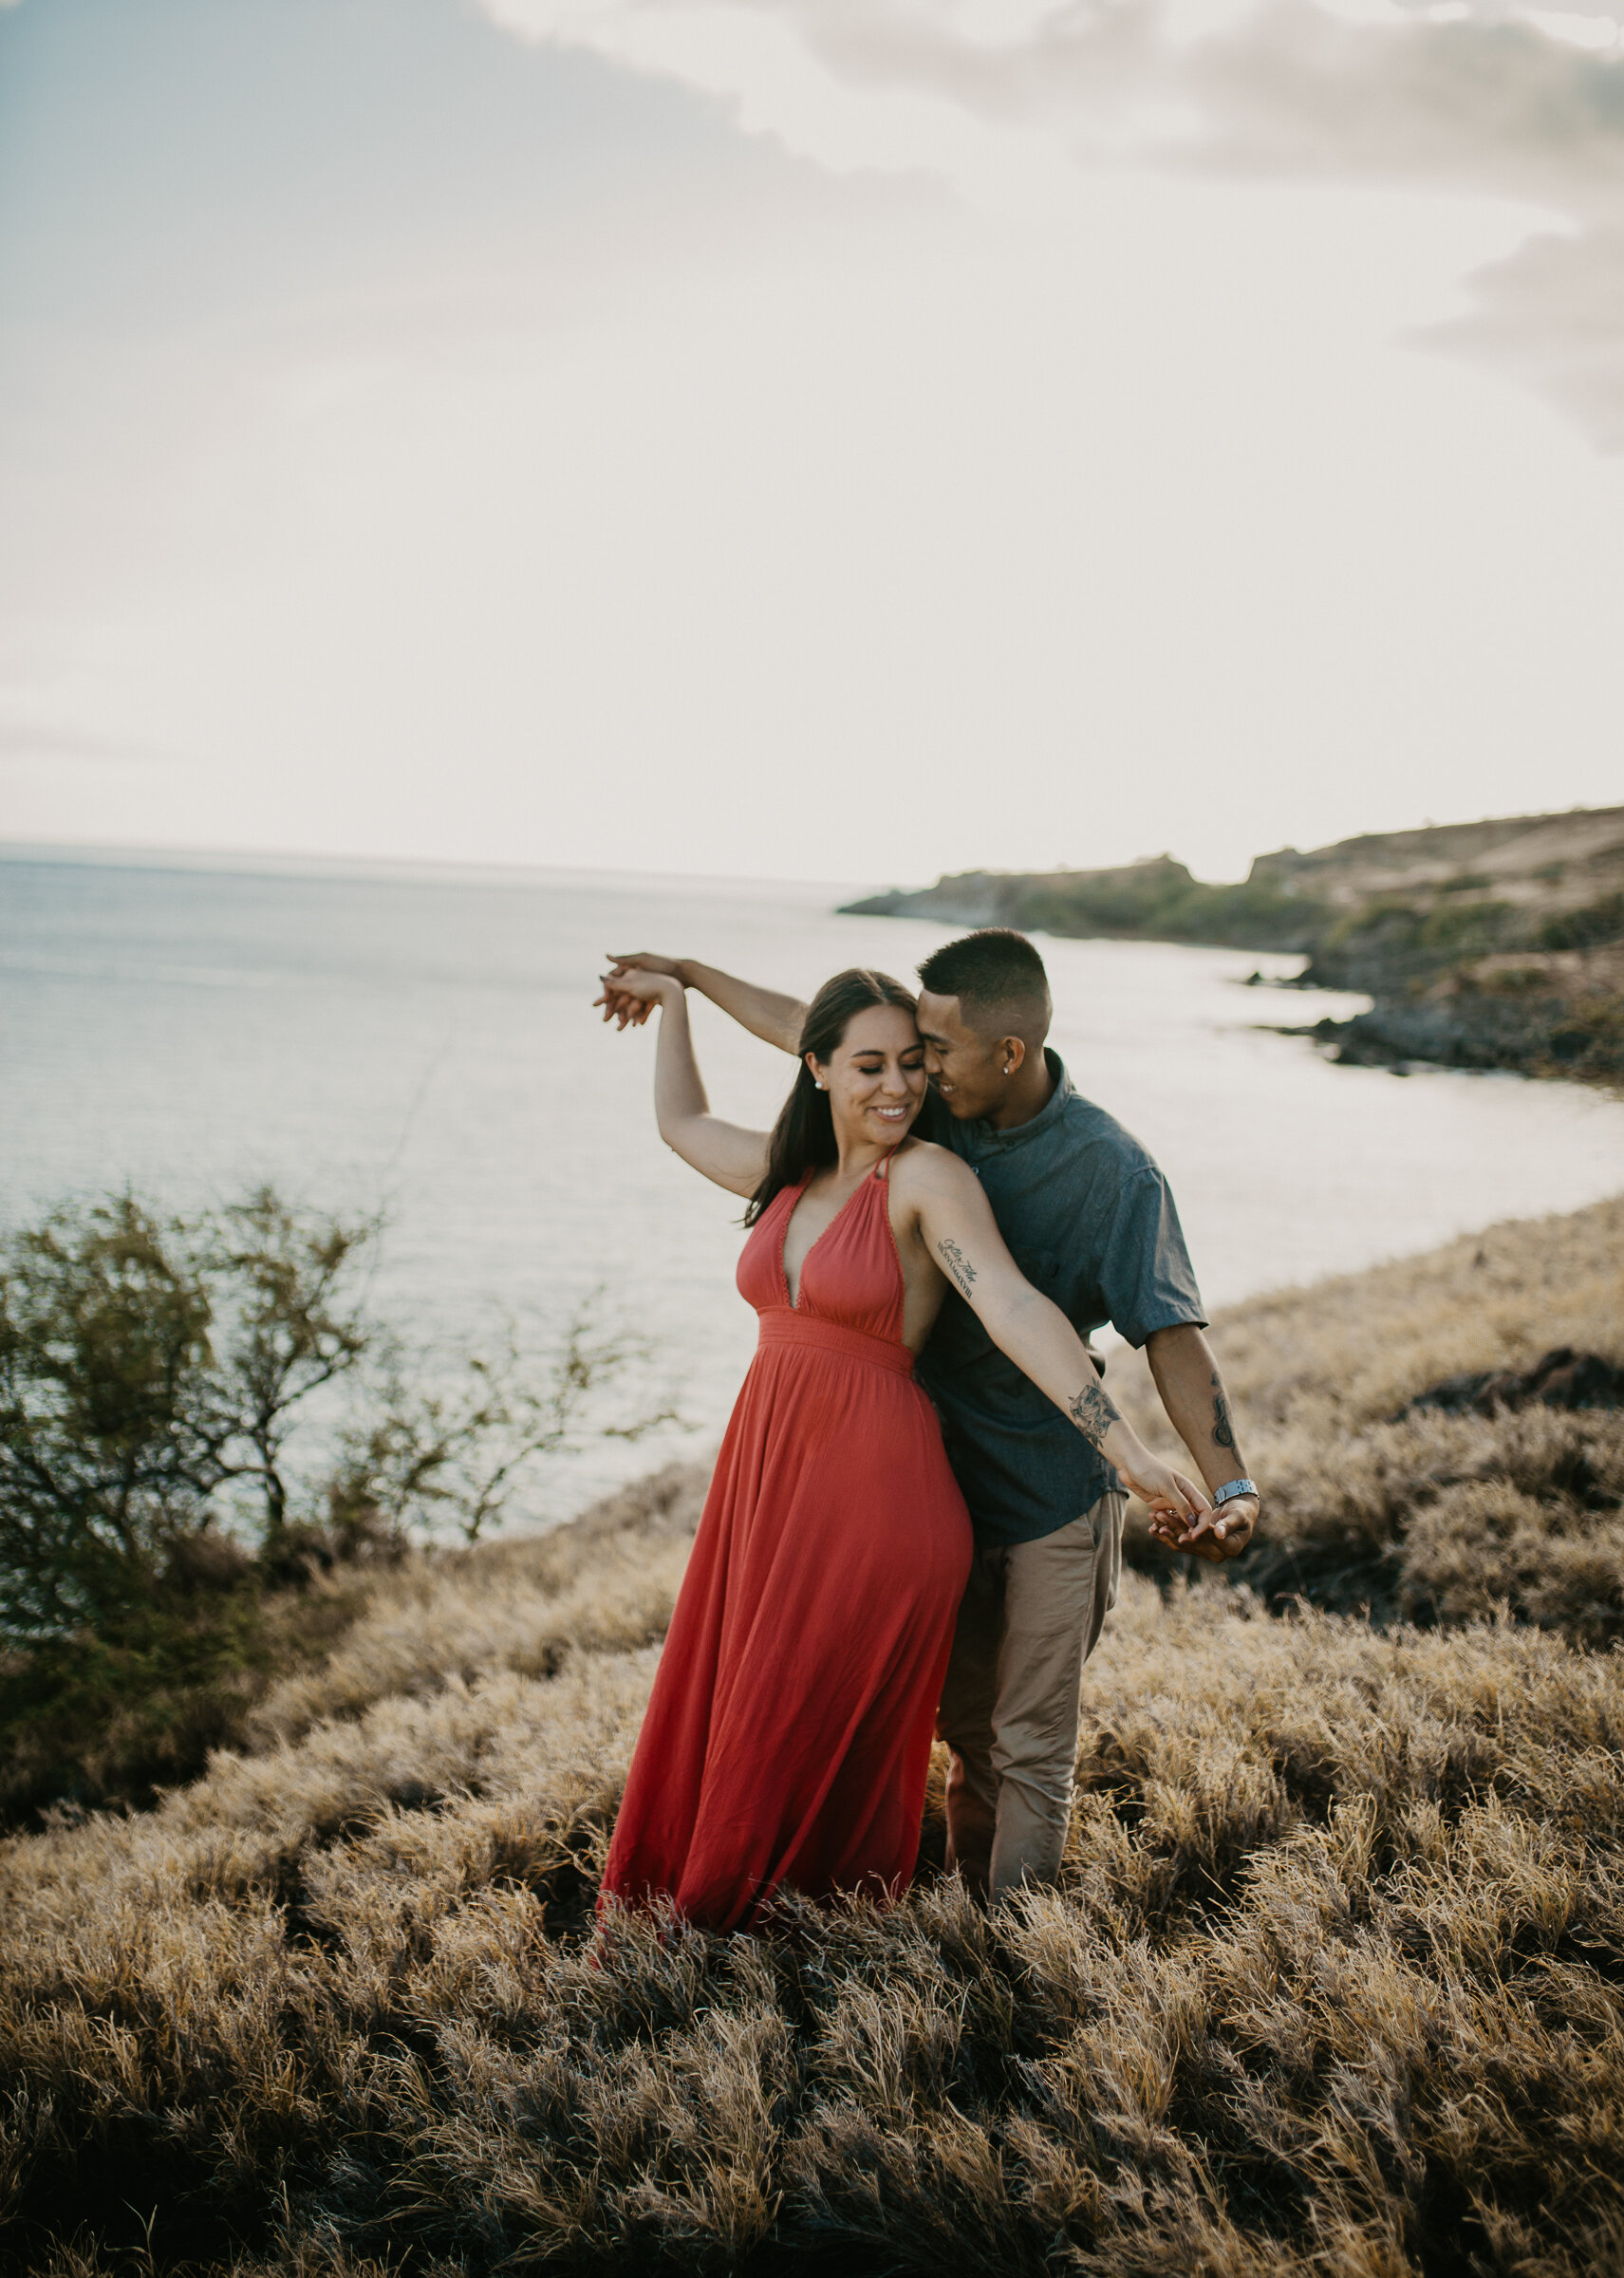  Engagement session overlooking the Pacific Ocean 